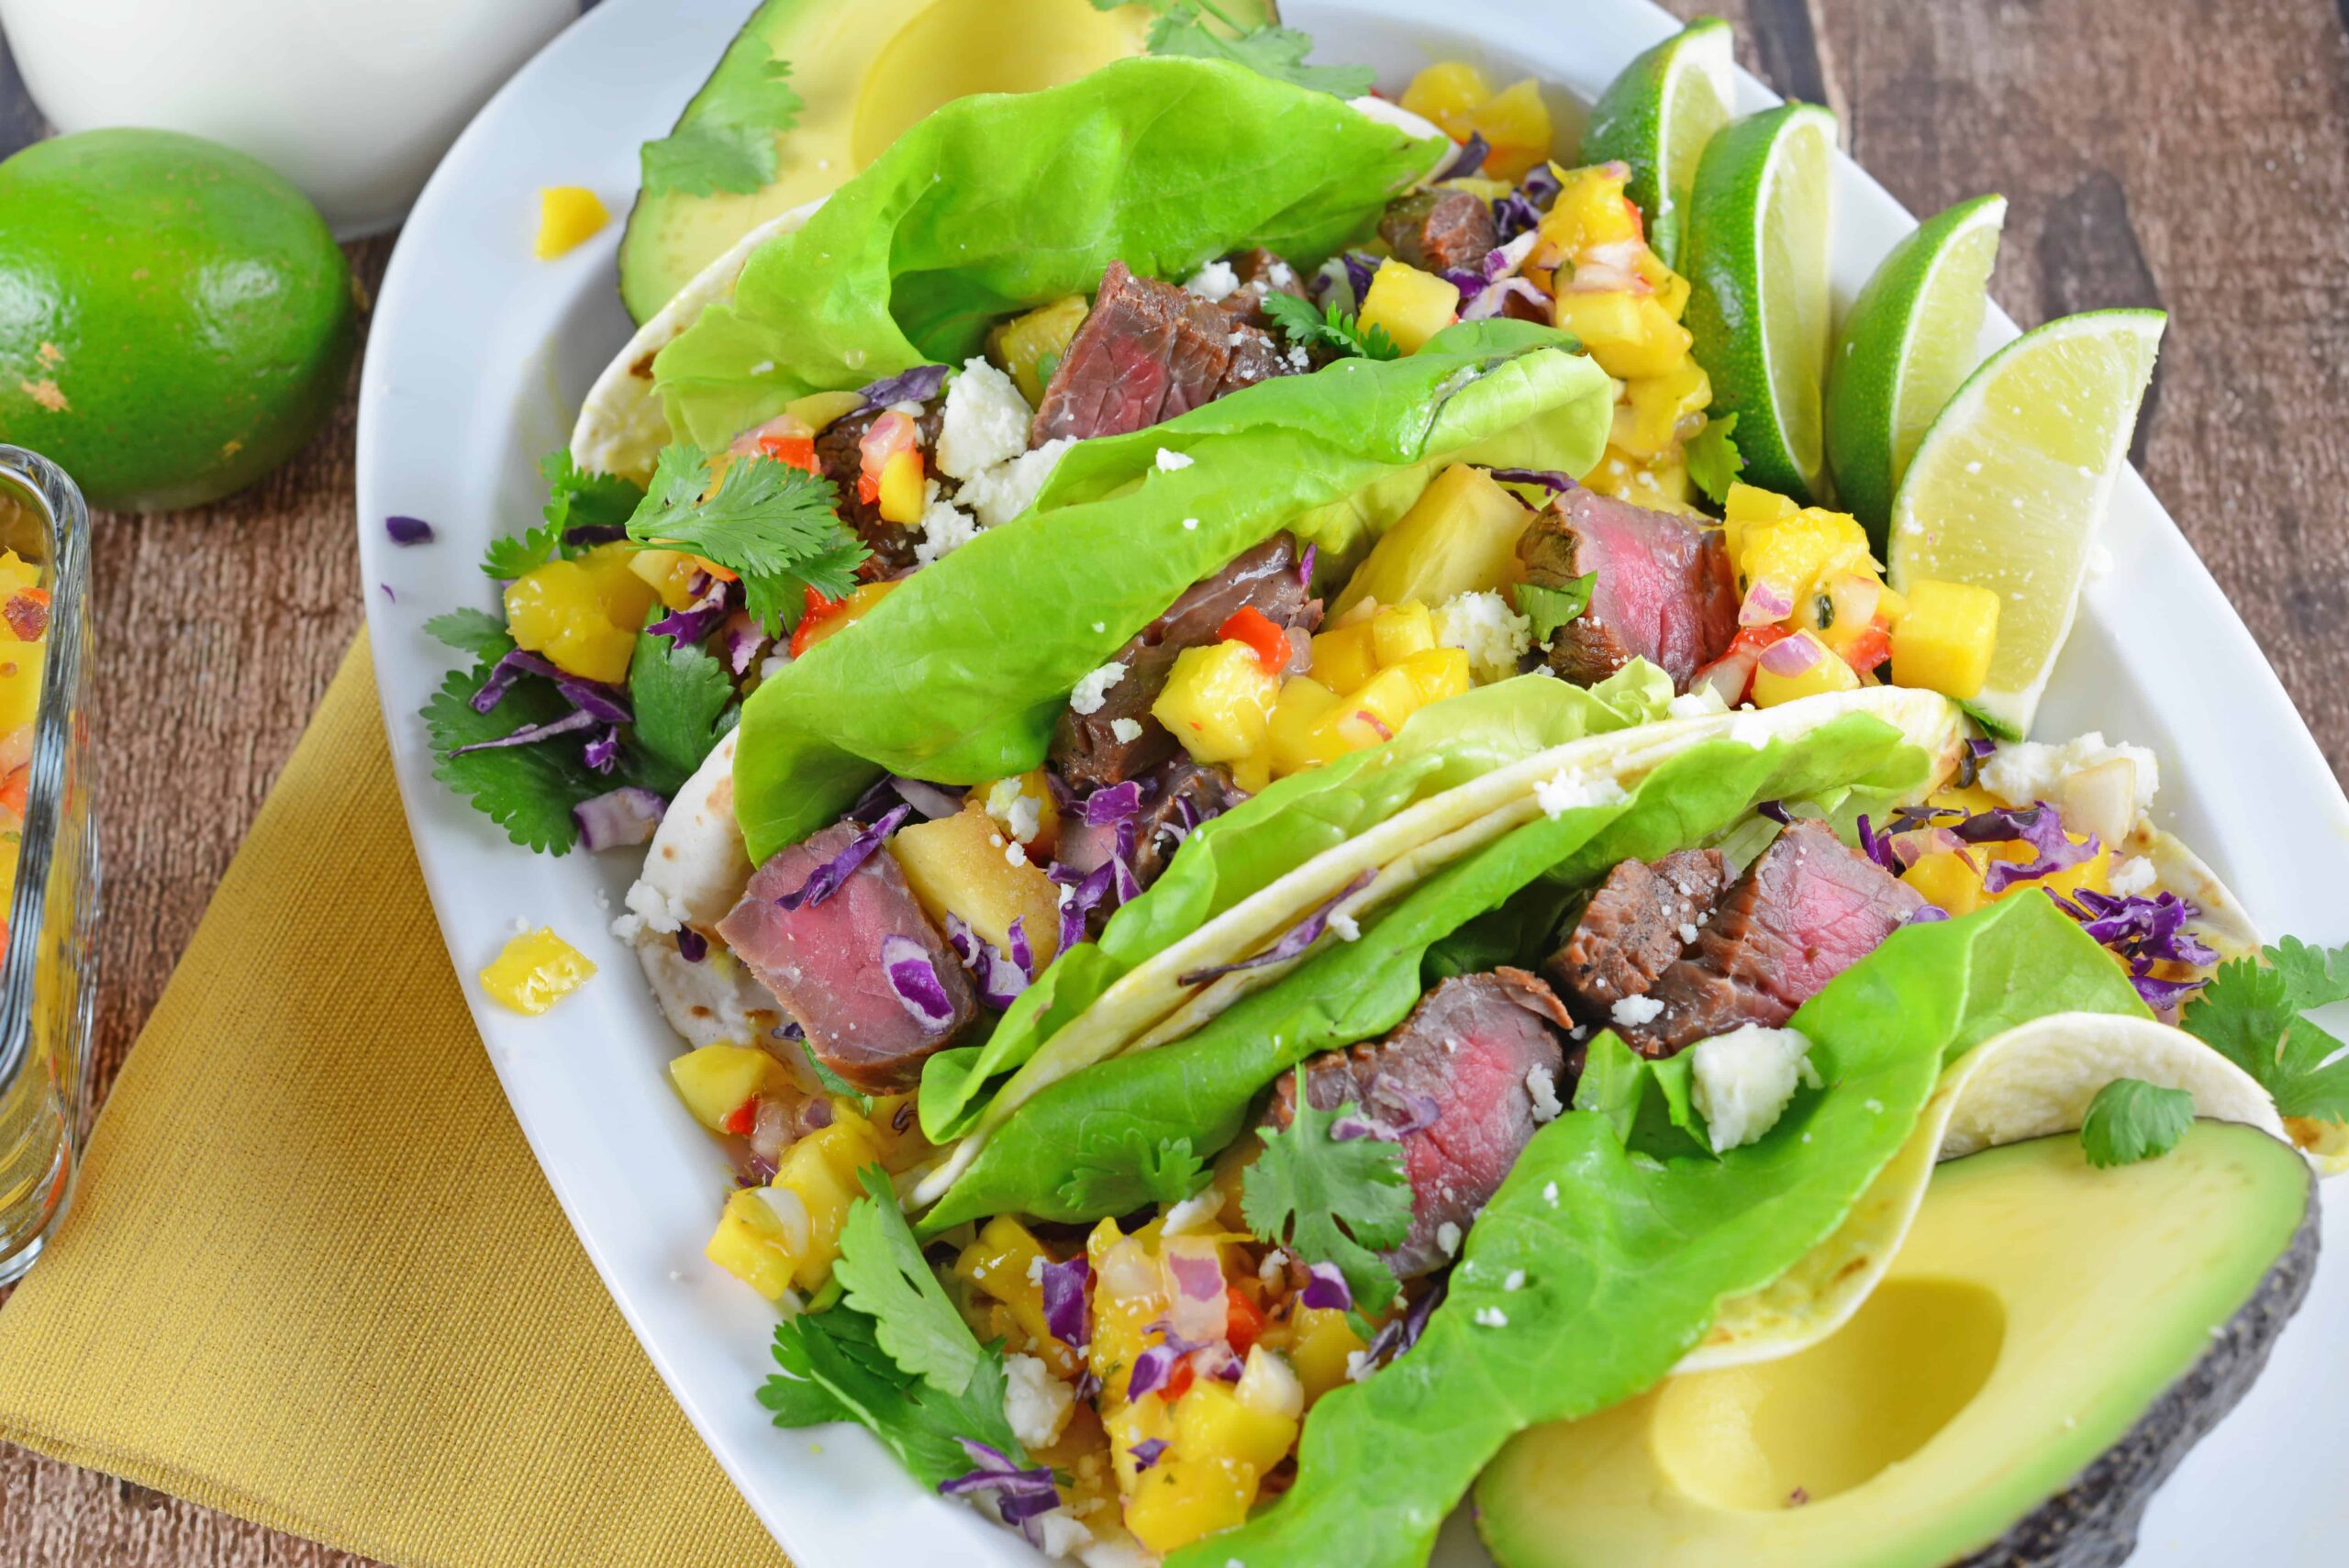 Tropical Beef Tacos Recipe - the secret for interesting and amazing soft tacos! Easy soft tacos with mango salsa, queso fresco and red cabbage. www.savoryexperiments.com